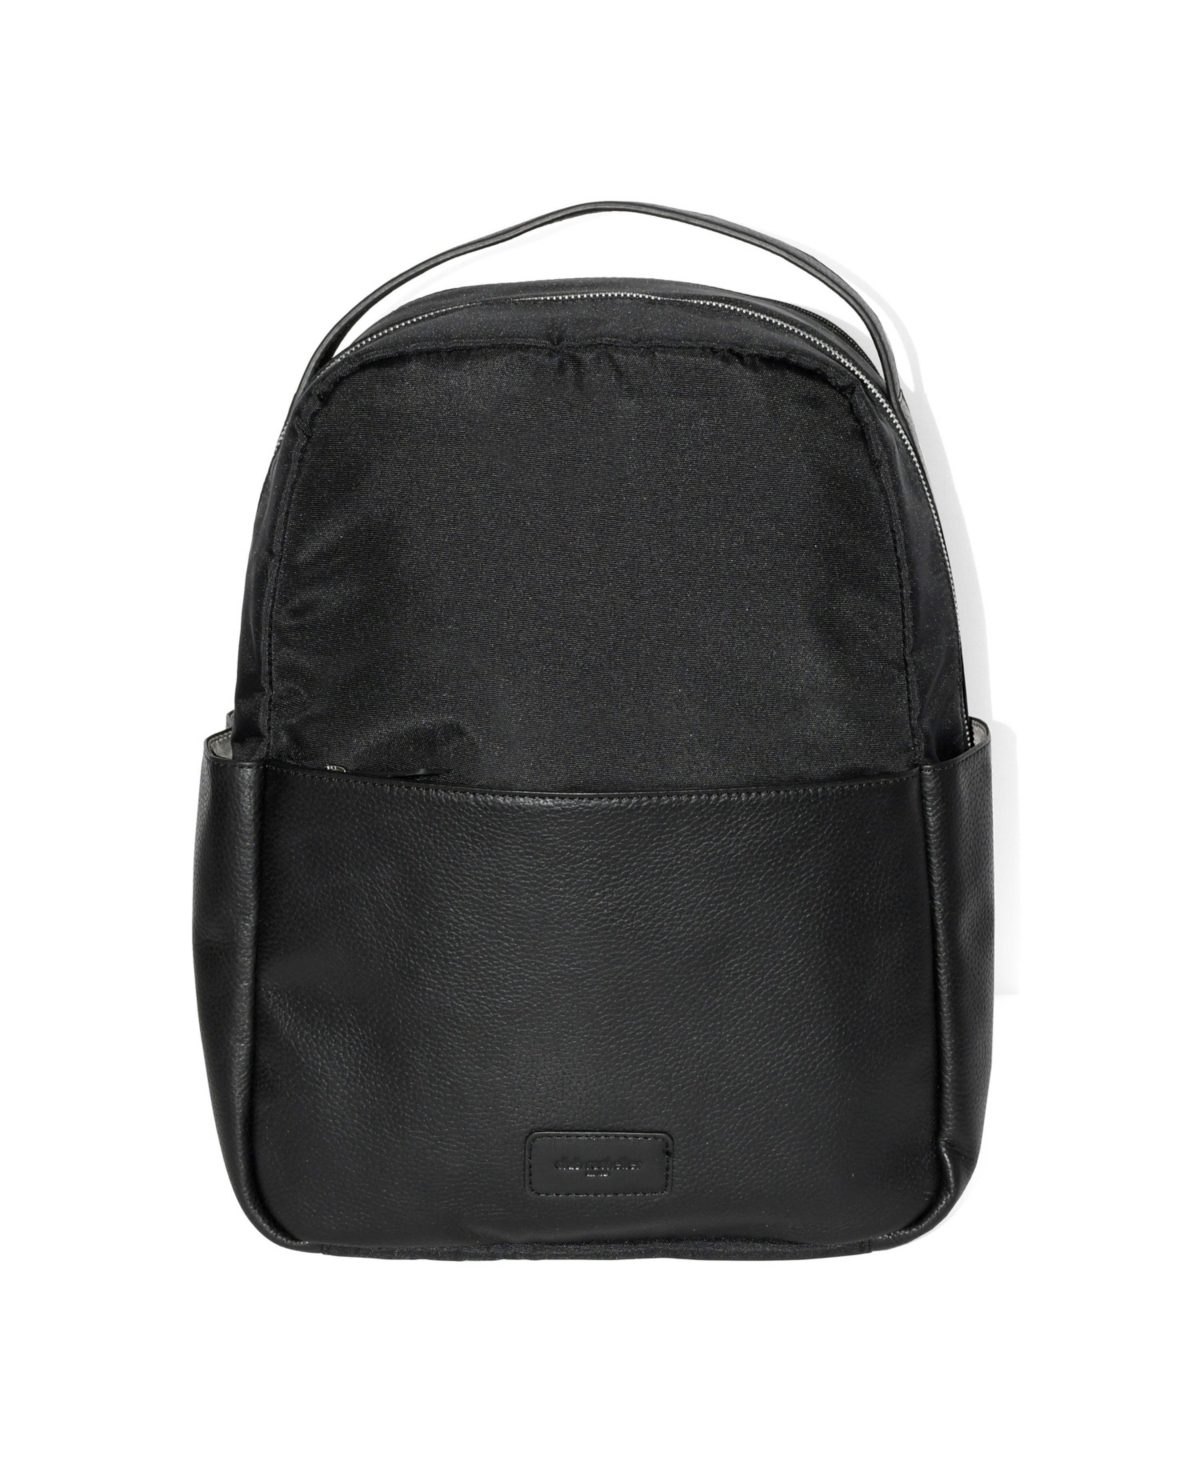 Leather Trim Double Entry Laptop Backpack - Black